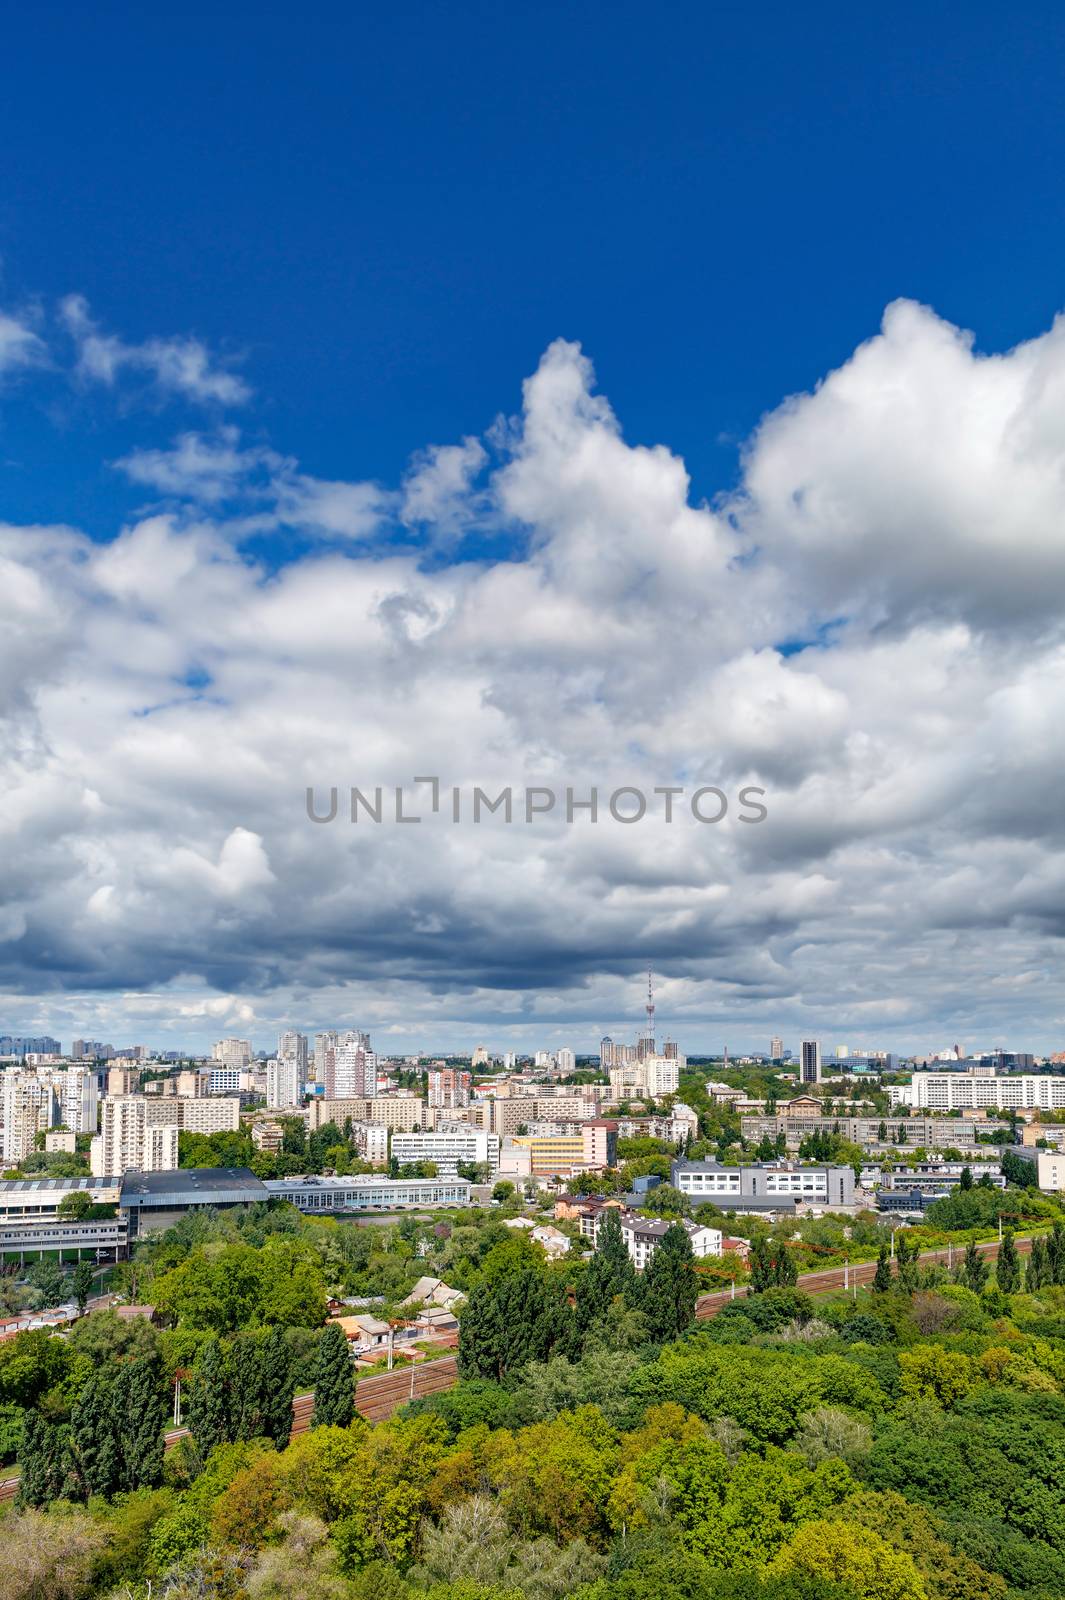 An urban landscape with a green park, residential areas and a TV tower against a bright blue sky with thickening clouds. by Sergii